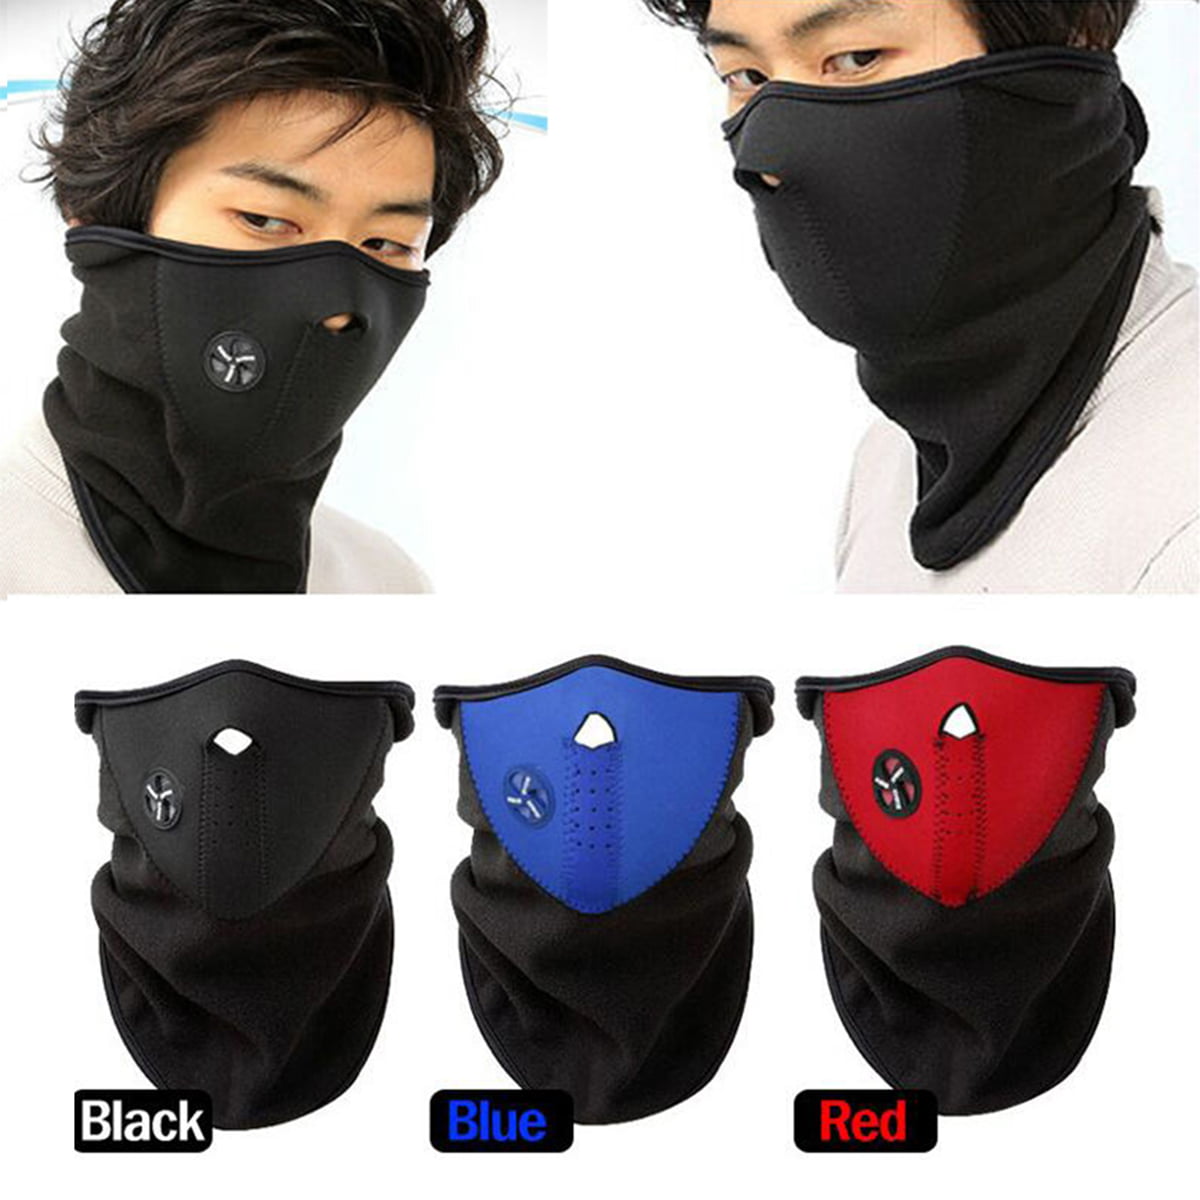 Outdoor Balaclava Full Face Mask Winter Cycling Cold Windproof Warm Mask Warmer 